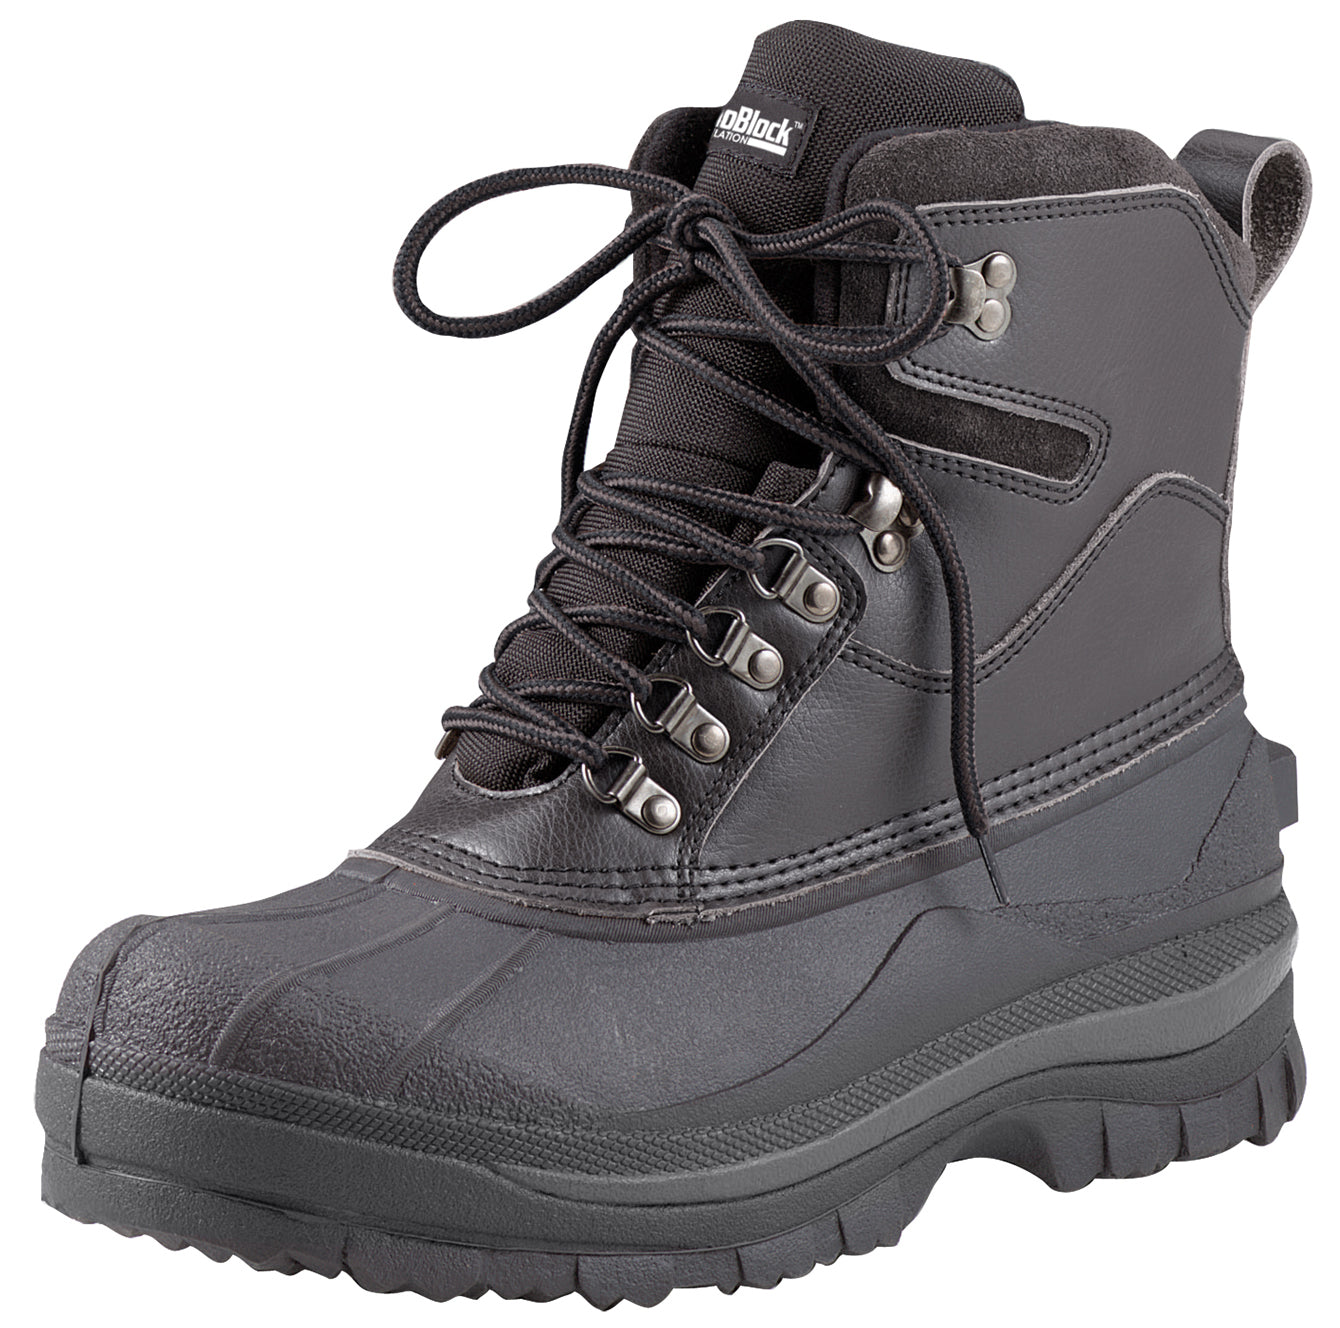 Cold Weather Hiking Boots - 8 Inch